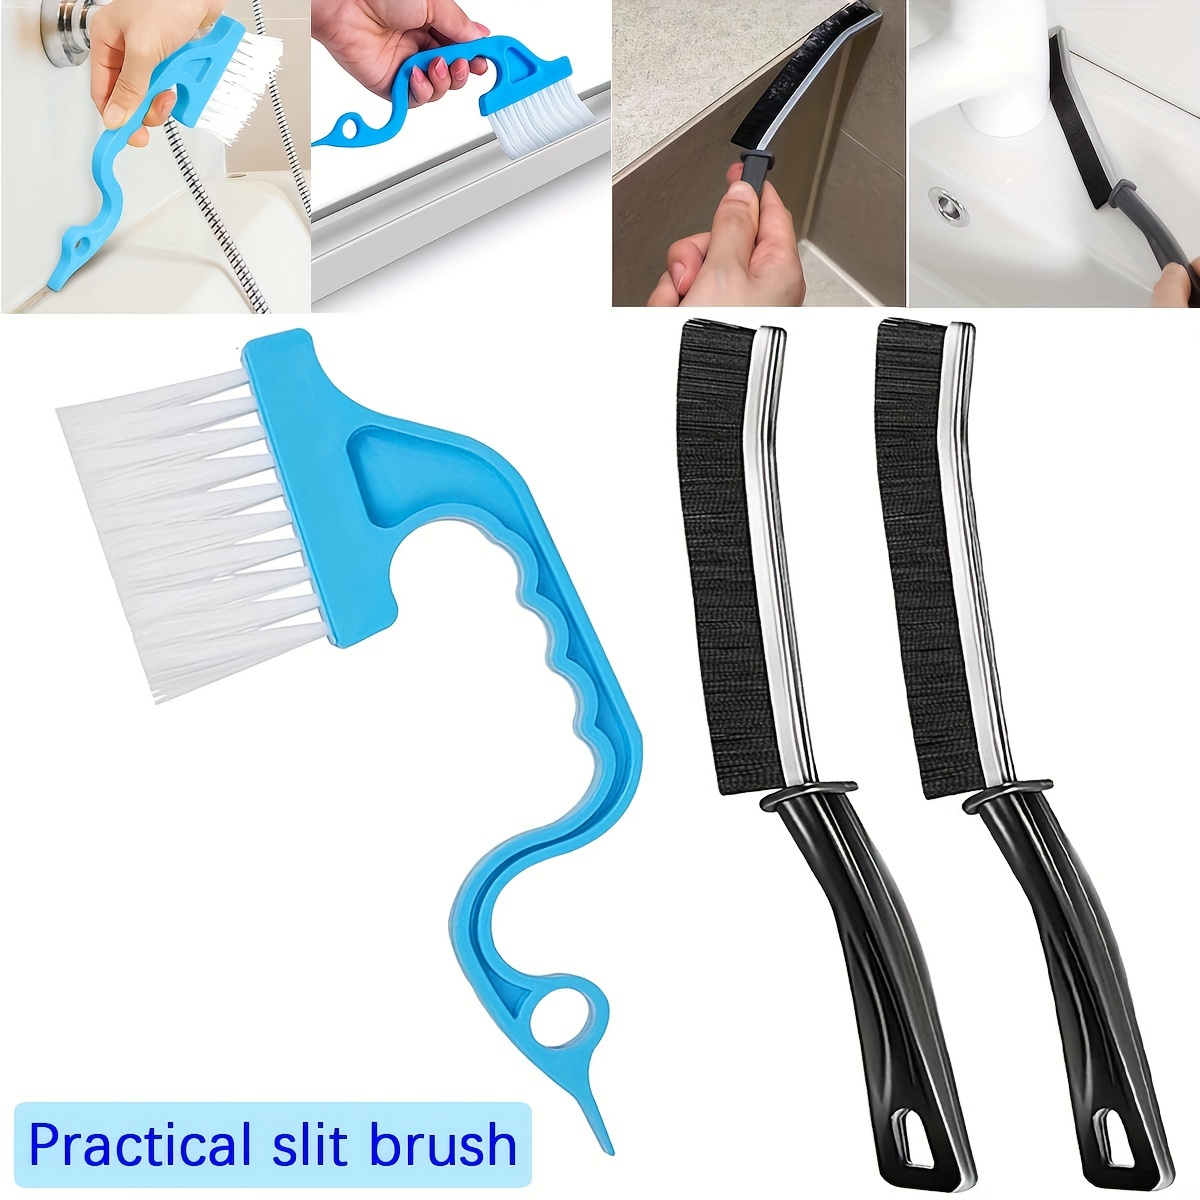 Groove Cleaning Brush, Crevice Brush, Window And Door Groove Brush